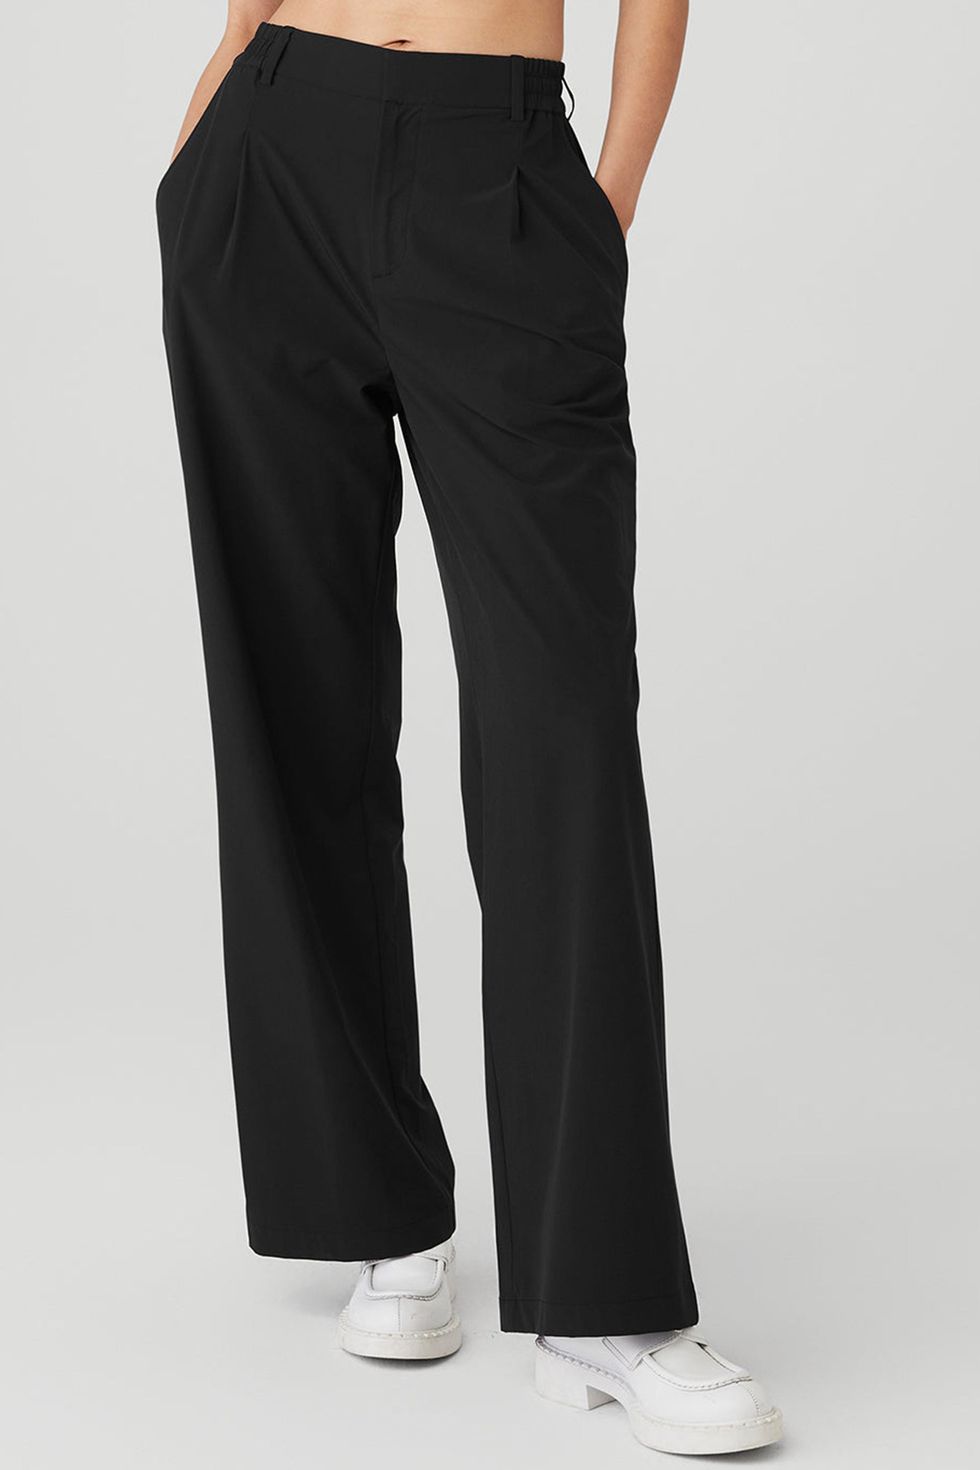 High-Waist Catch The Light Short in Black by Alo Yoga